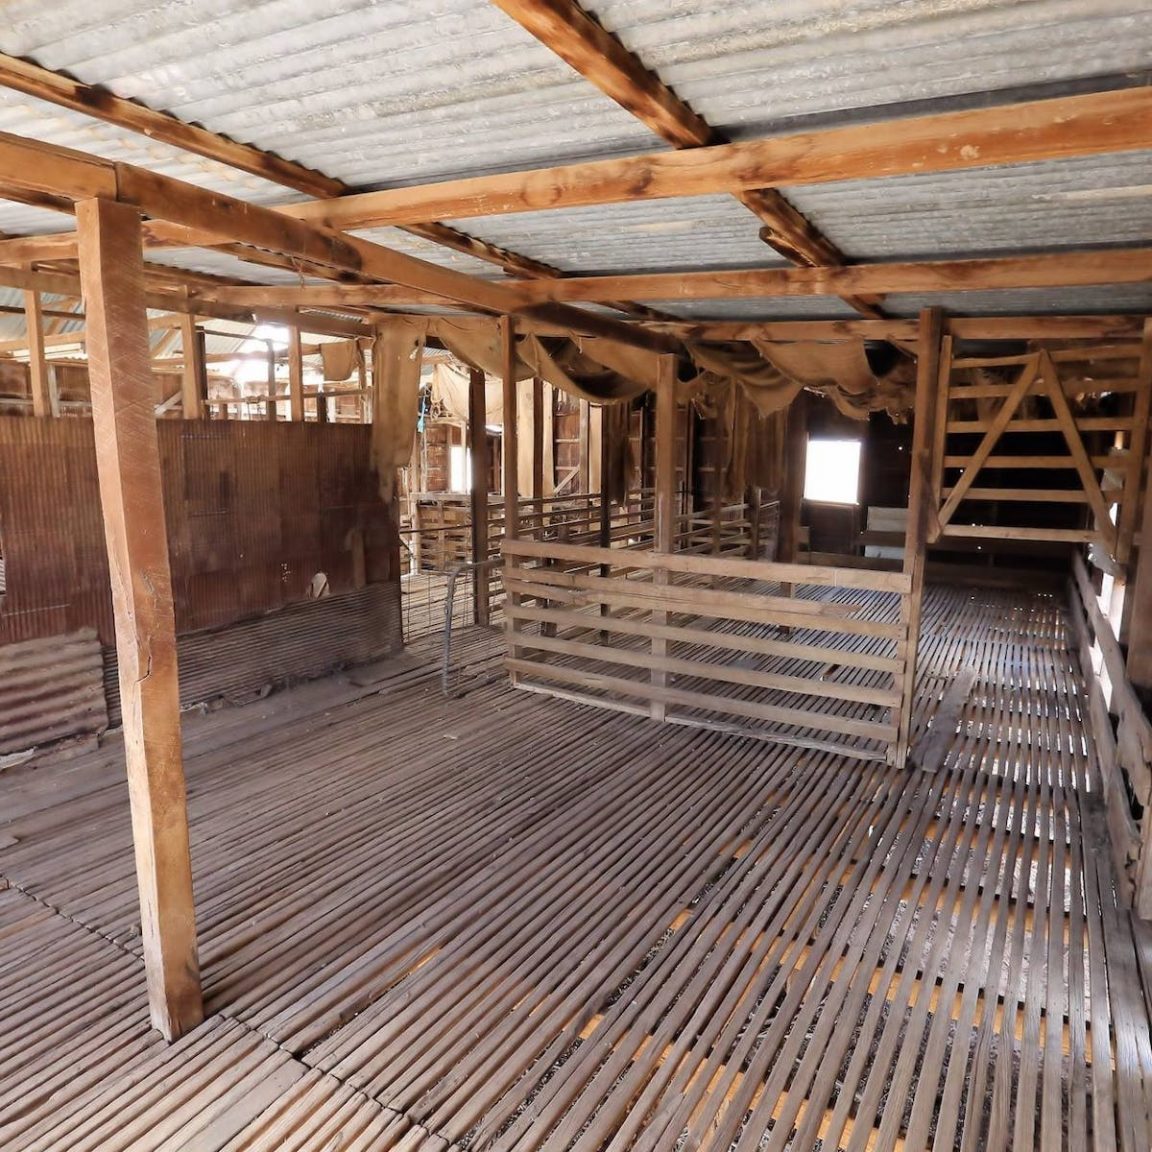 Inside the Shearing Shed